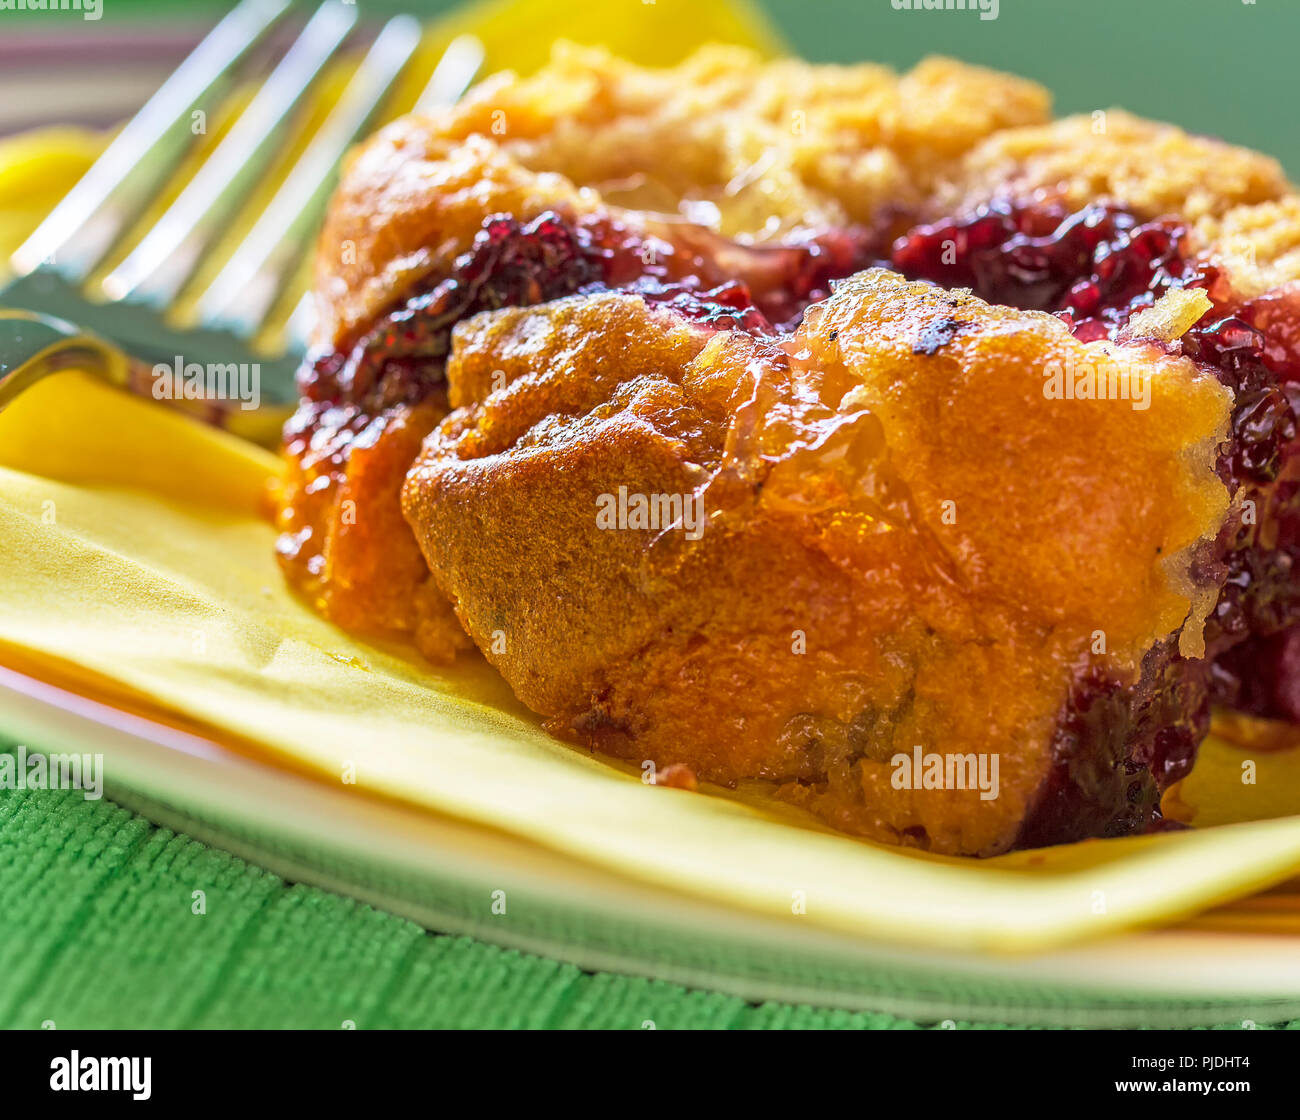 Lemon and raspberry cake on a yellow serviette with out of focus fork. Stock Photo